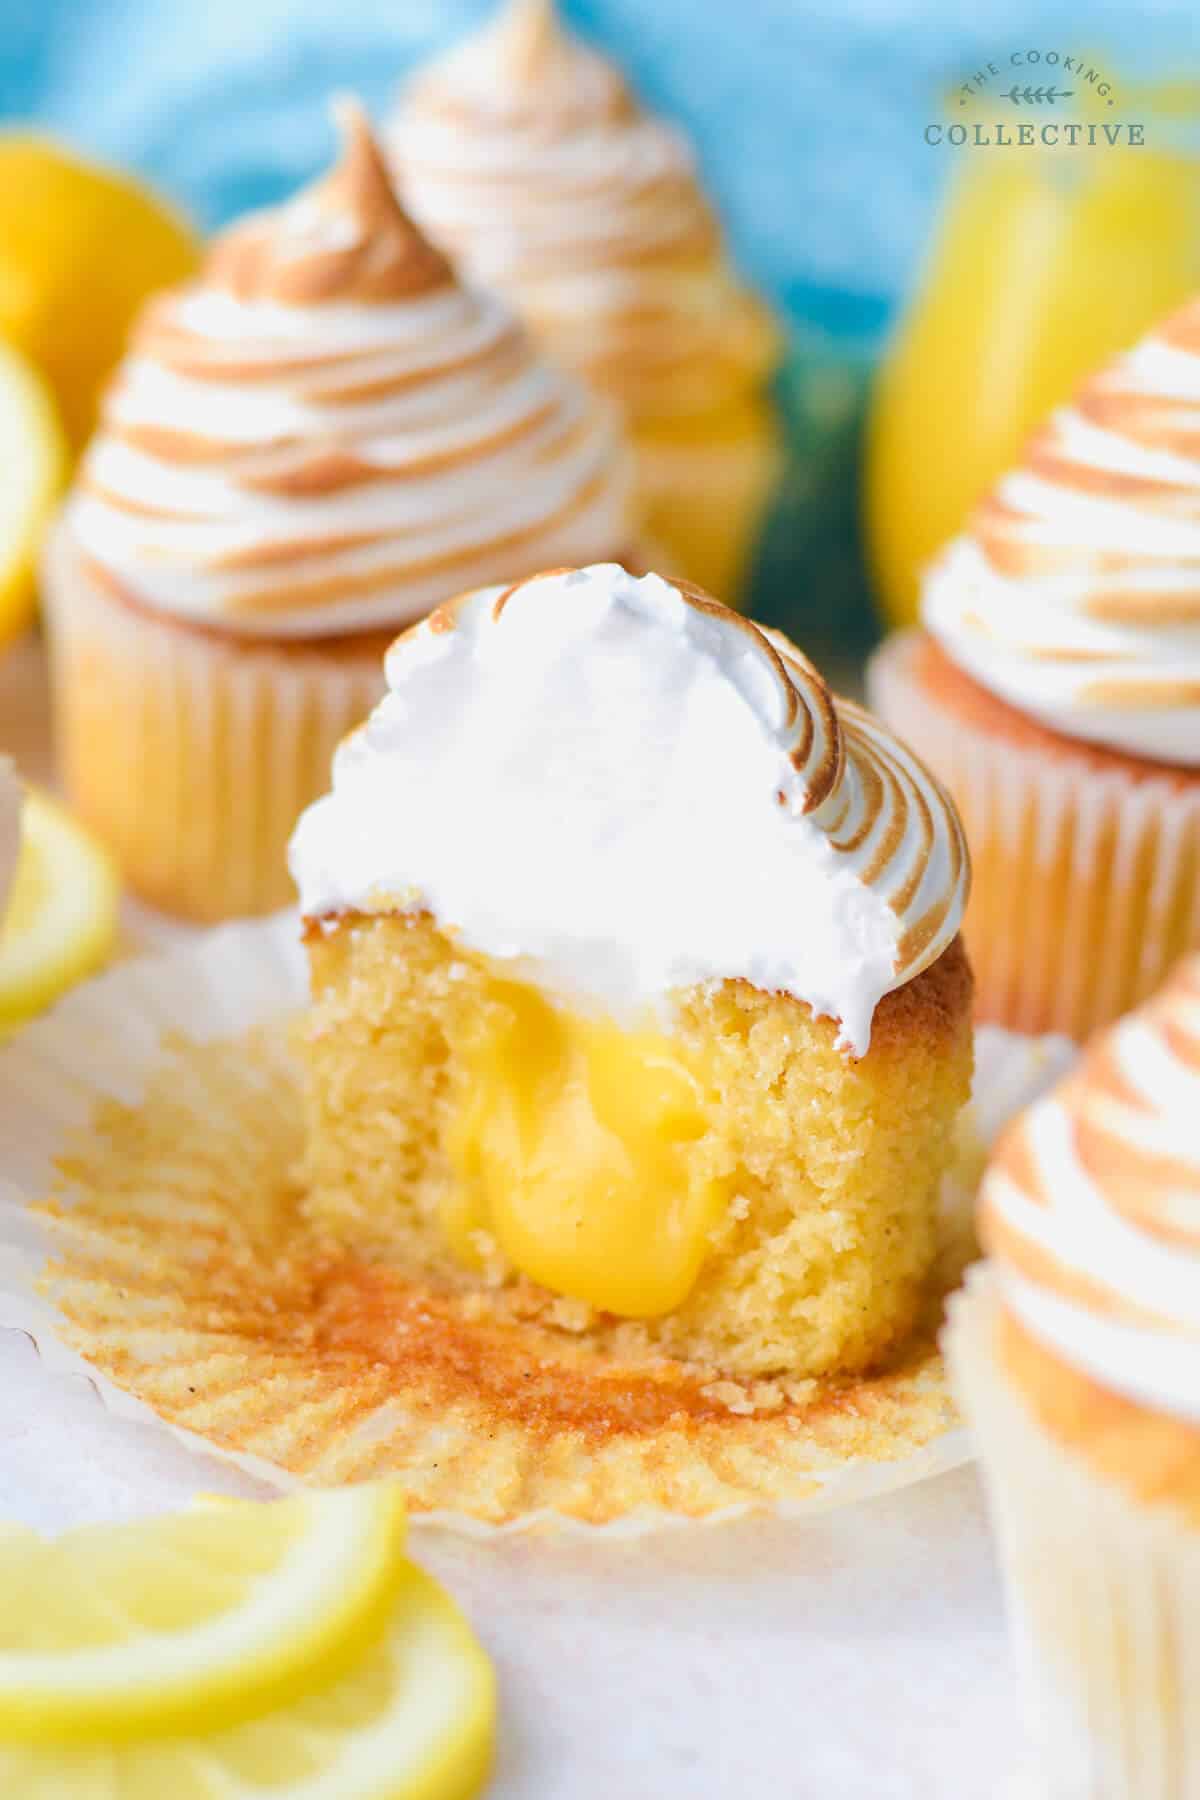 a lemon curd cupcake topped with meringue cut in half, showing the lemon curd filling.